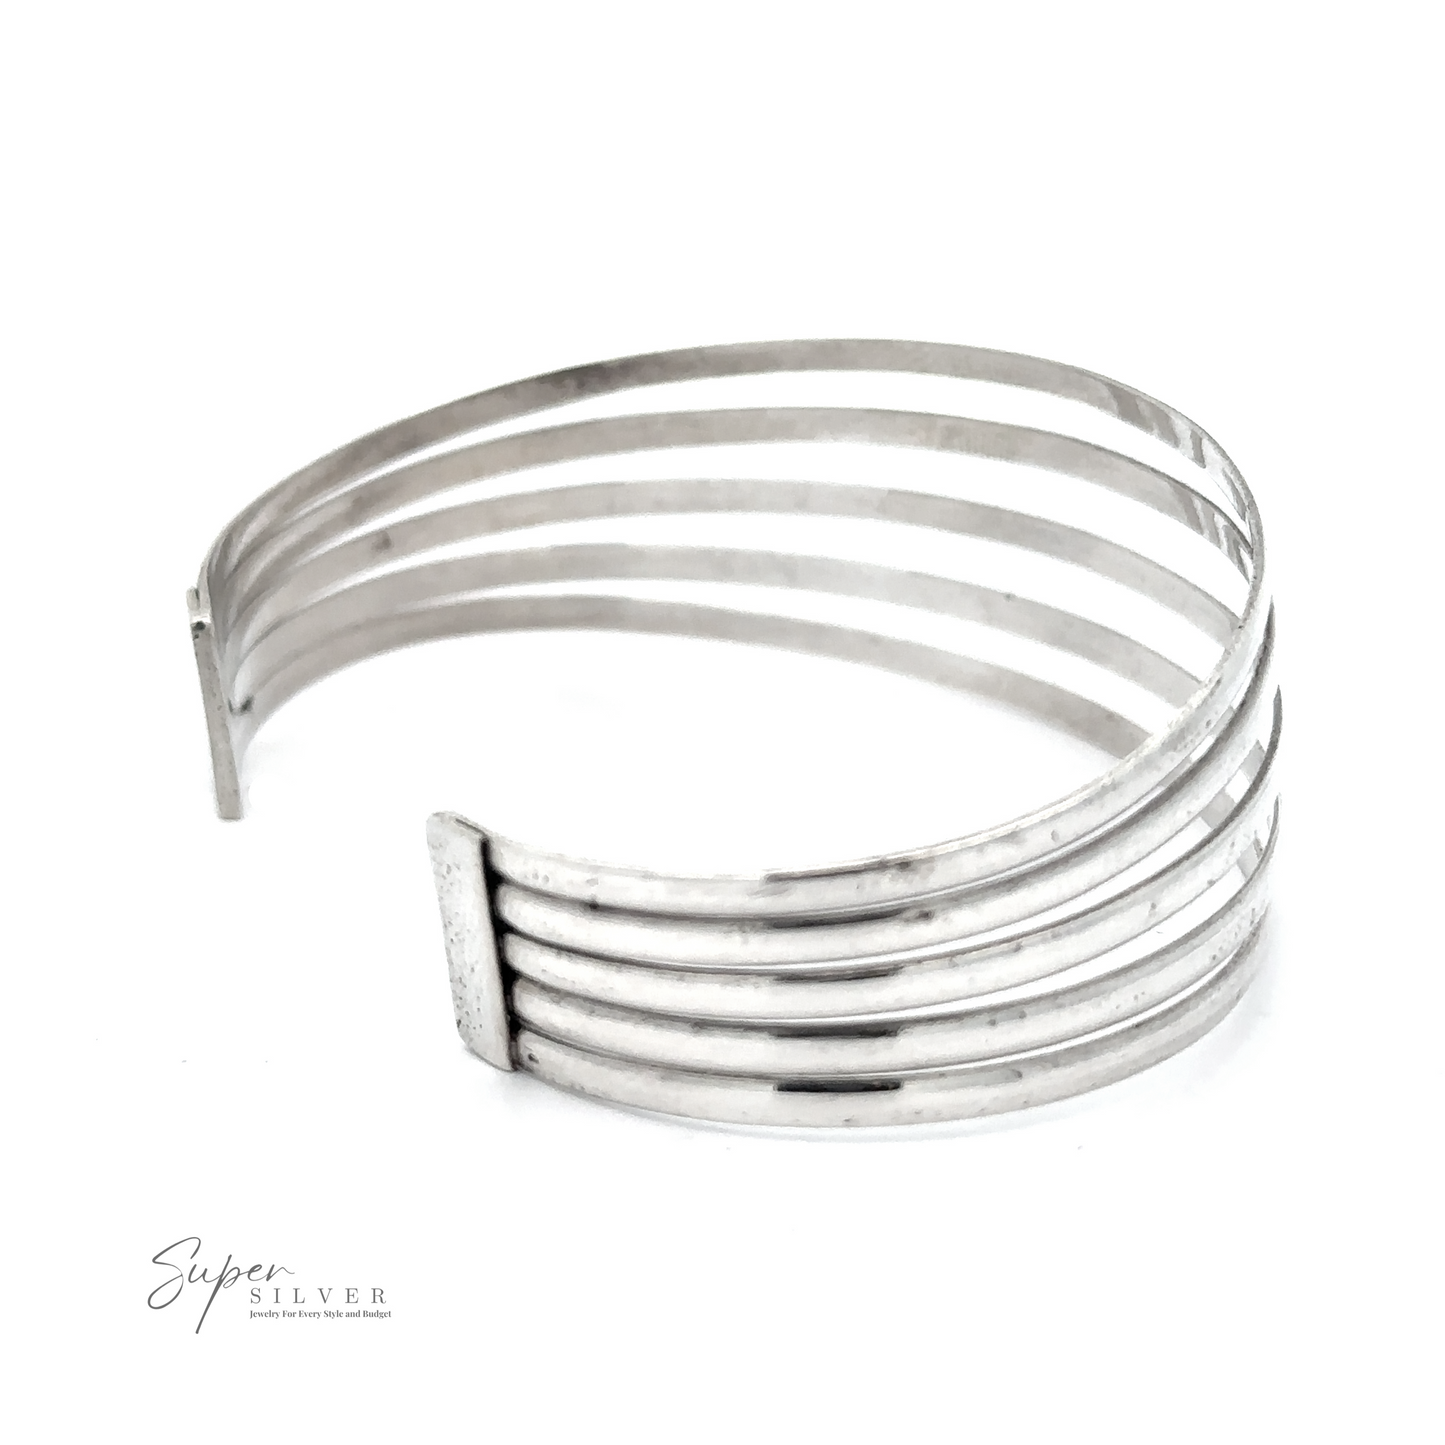 A fashionable Simple Cuff with Open Design featuring parallel horizontal bars and an open end design. Crafted from .925 Sterling Silver, the silver cuff boasts the "Super Silver" logo printed in the lower left corner, exuding a modern chic appeal.